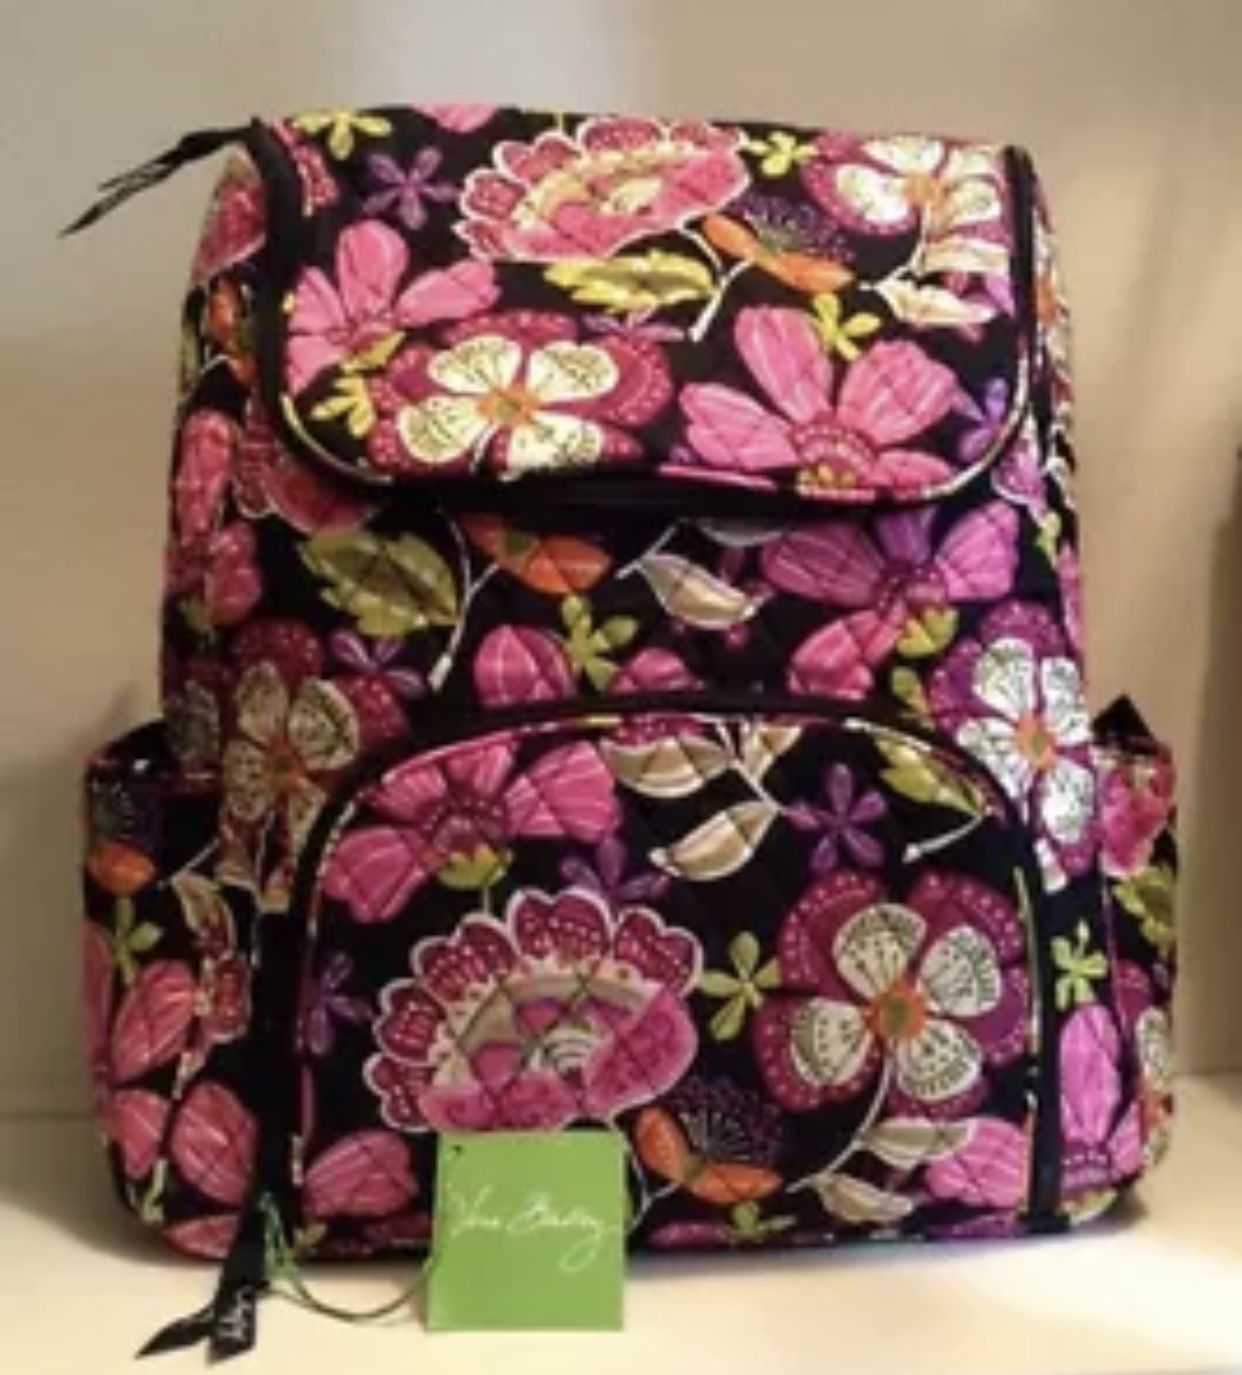 New with tags Vera Bradley Double Zip Backpack in Piroutte Pink